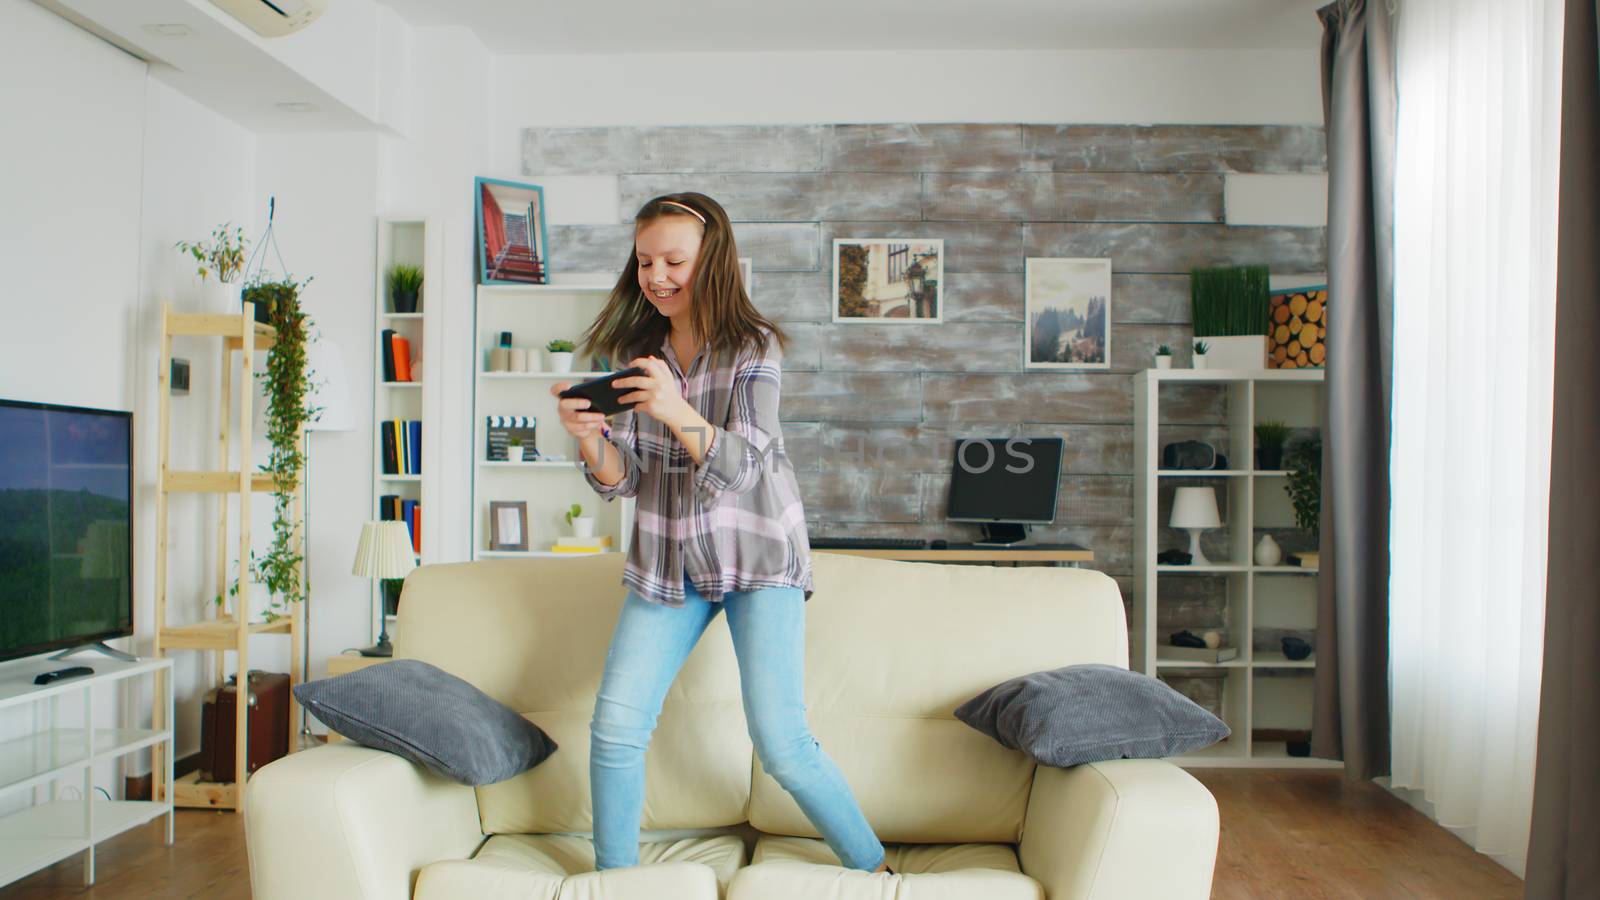 Little girl jumping on the couch in living room while playing video games on her phone.